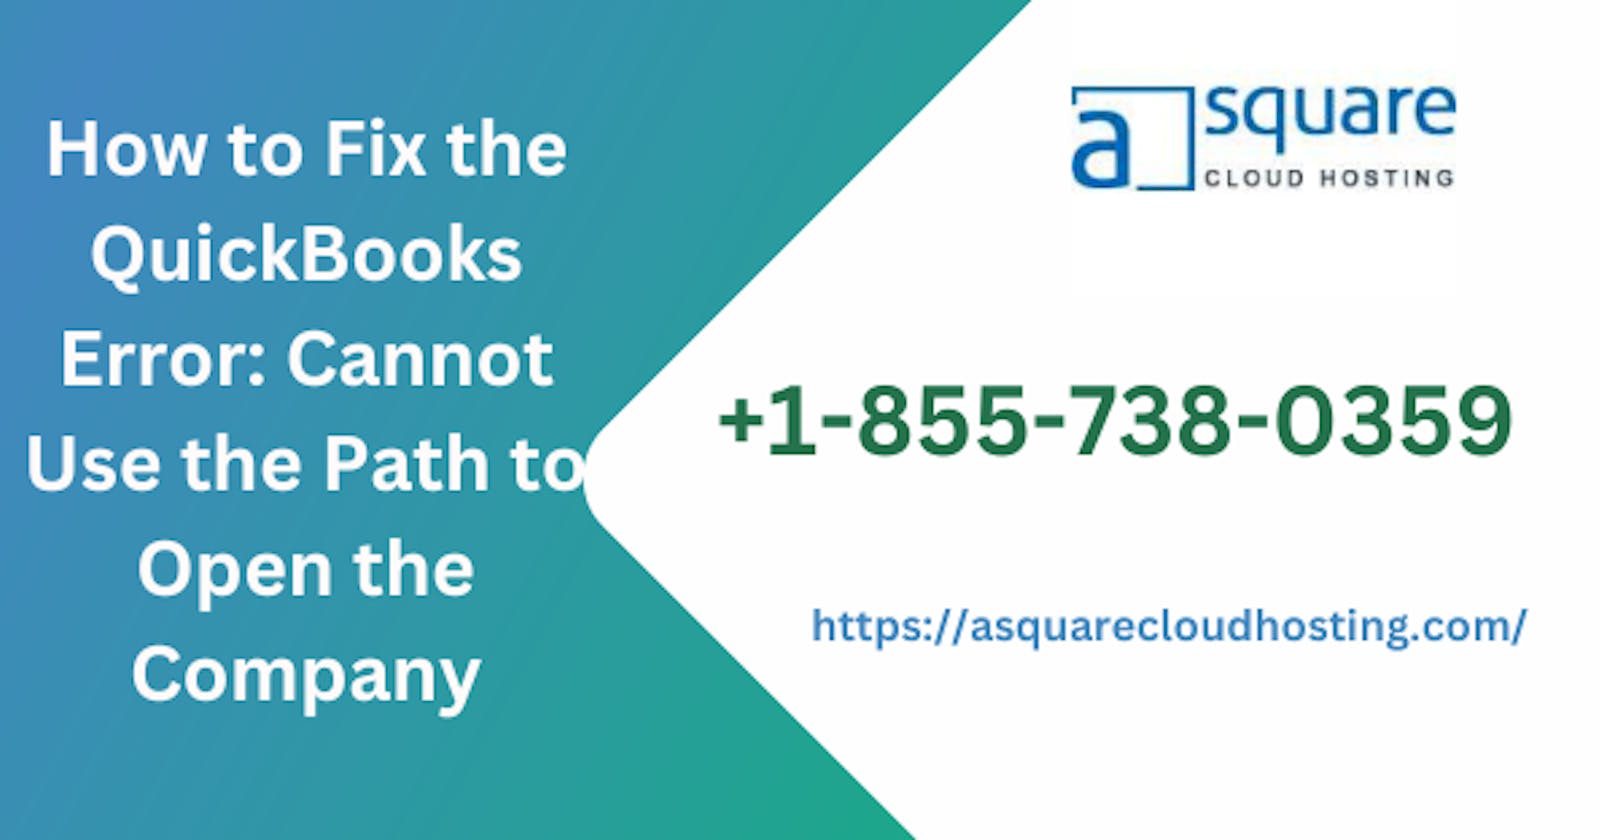 How to Fix the QuickBooks Error: Cannot Use the Path to Open the Company